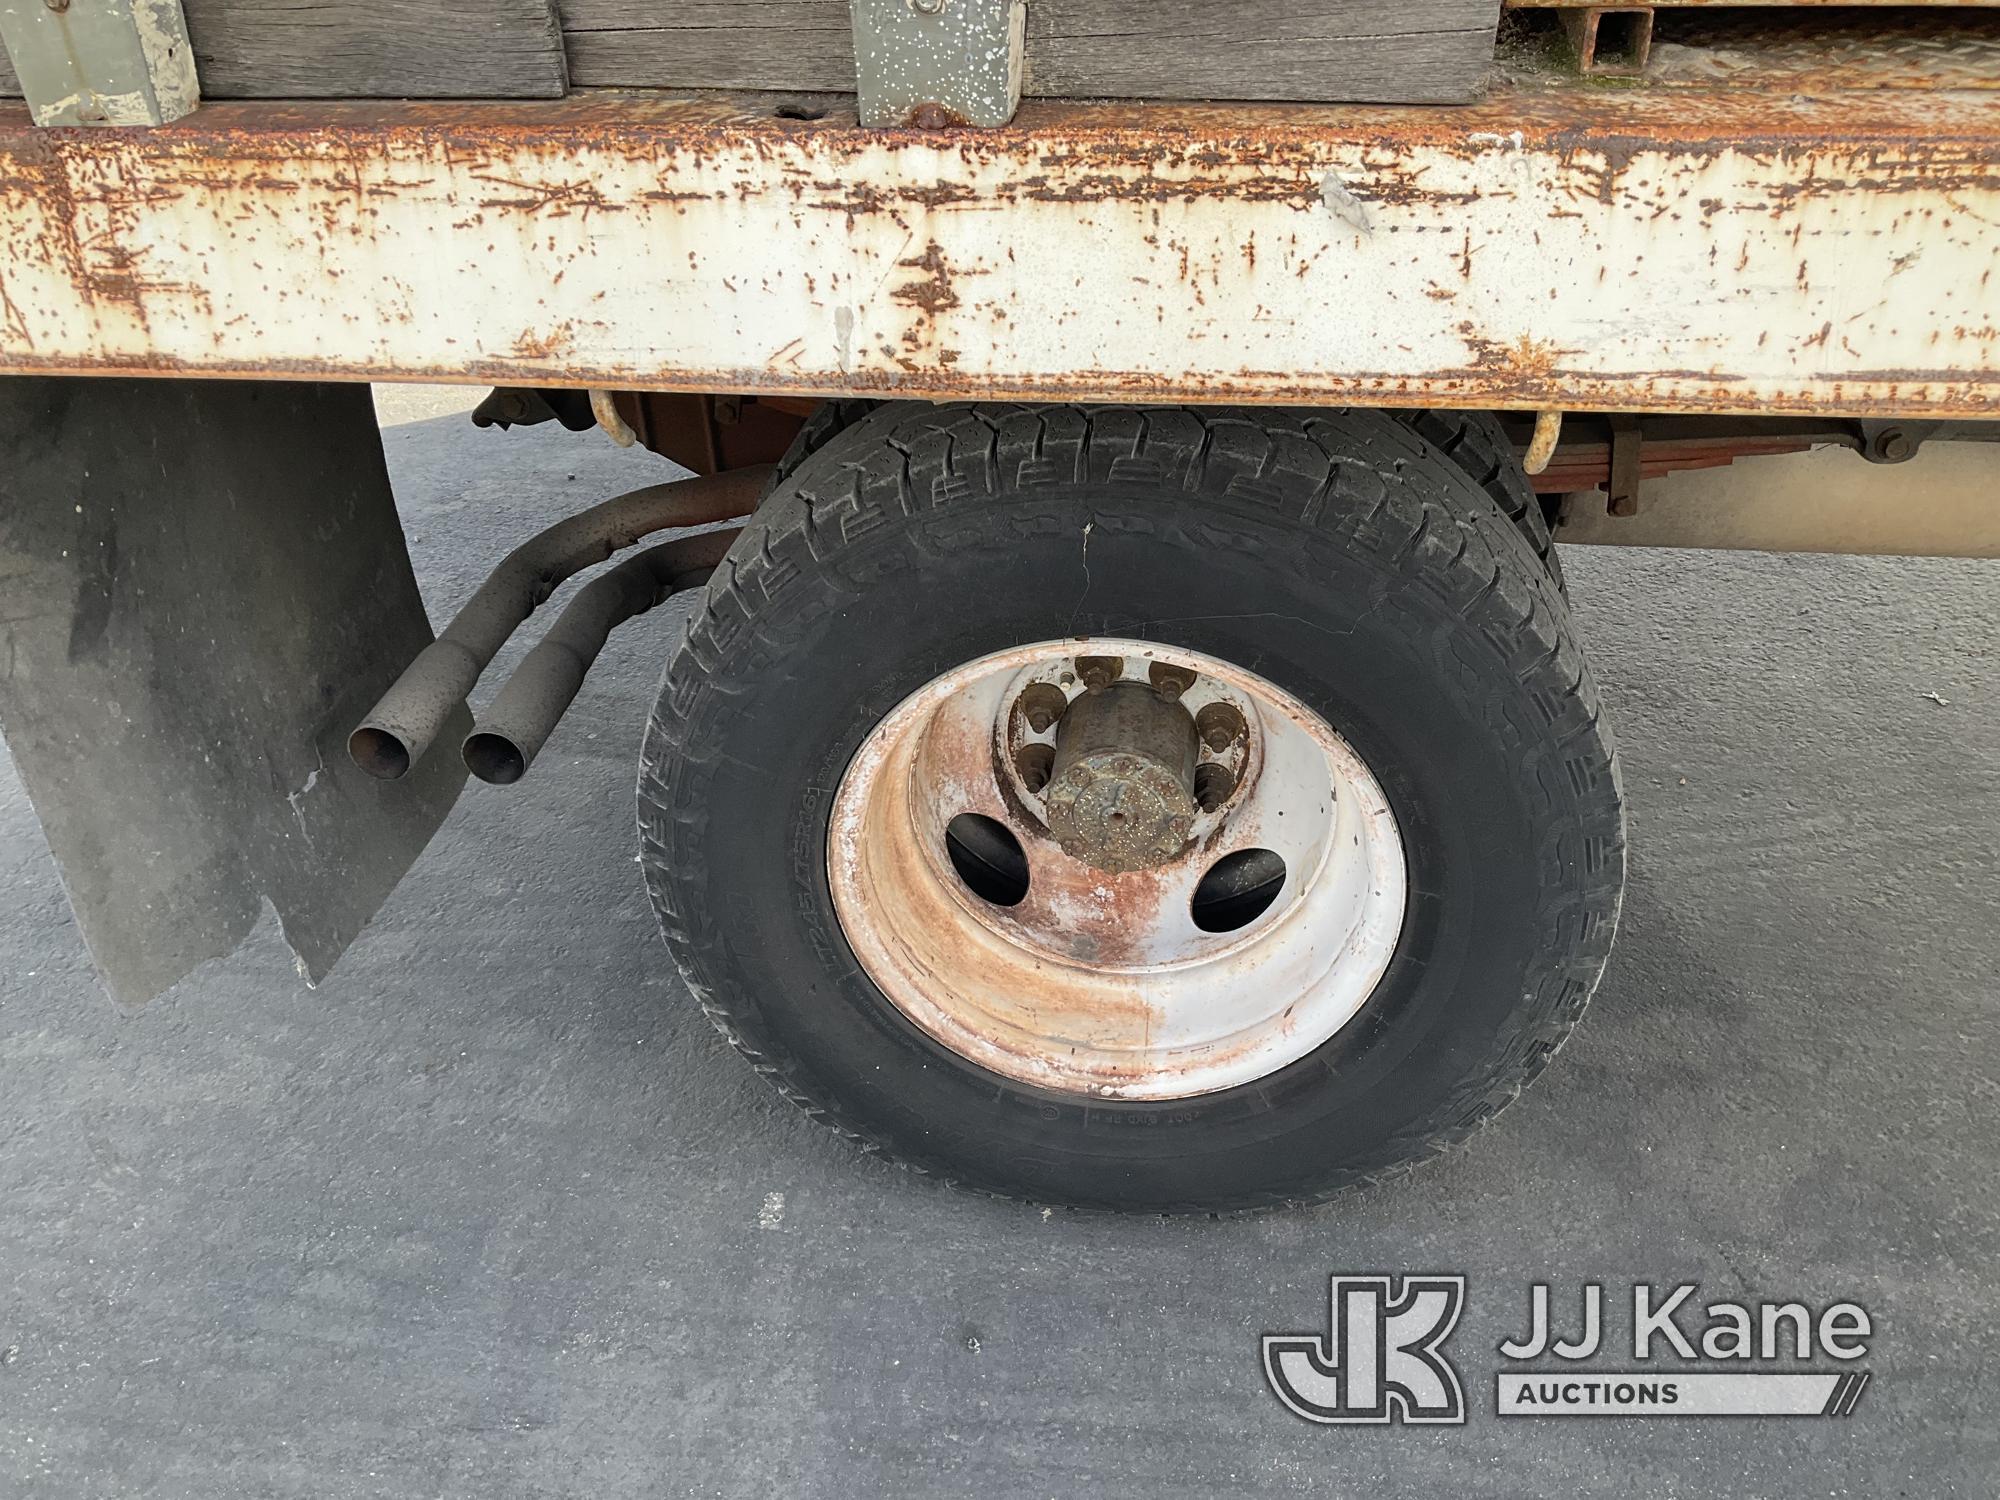 (Jurupa Valley, CA) 1997 Ford F-350 Stake Truck Runs & Moves With Jump, Bad Charging System